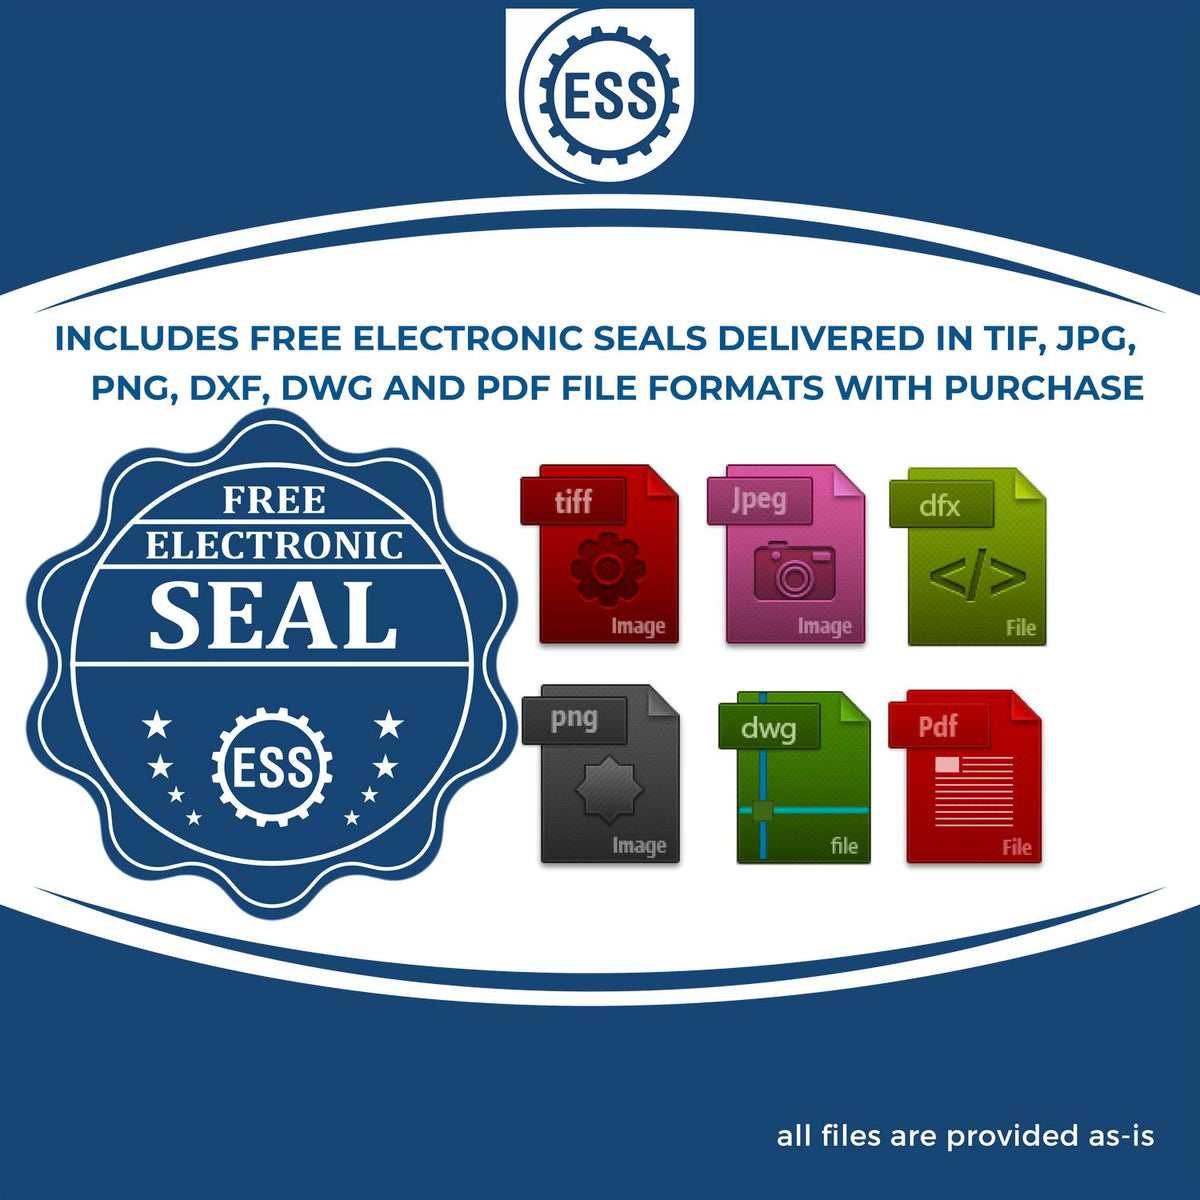 An infographic for the free electronic seal for the Slim Pre-Inked South Carolina Landscape Architect Seal Stamp illustrating the different file type icons such as DXF, DWG, TIF, JPG and PNG.